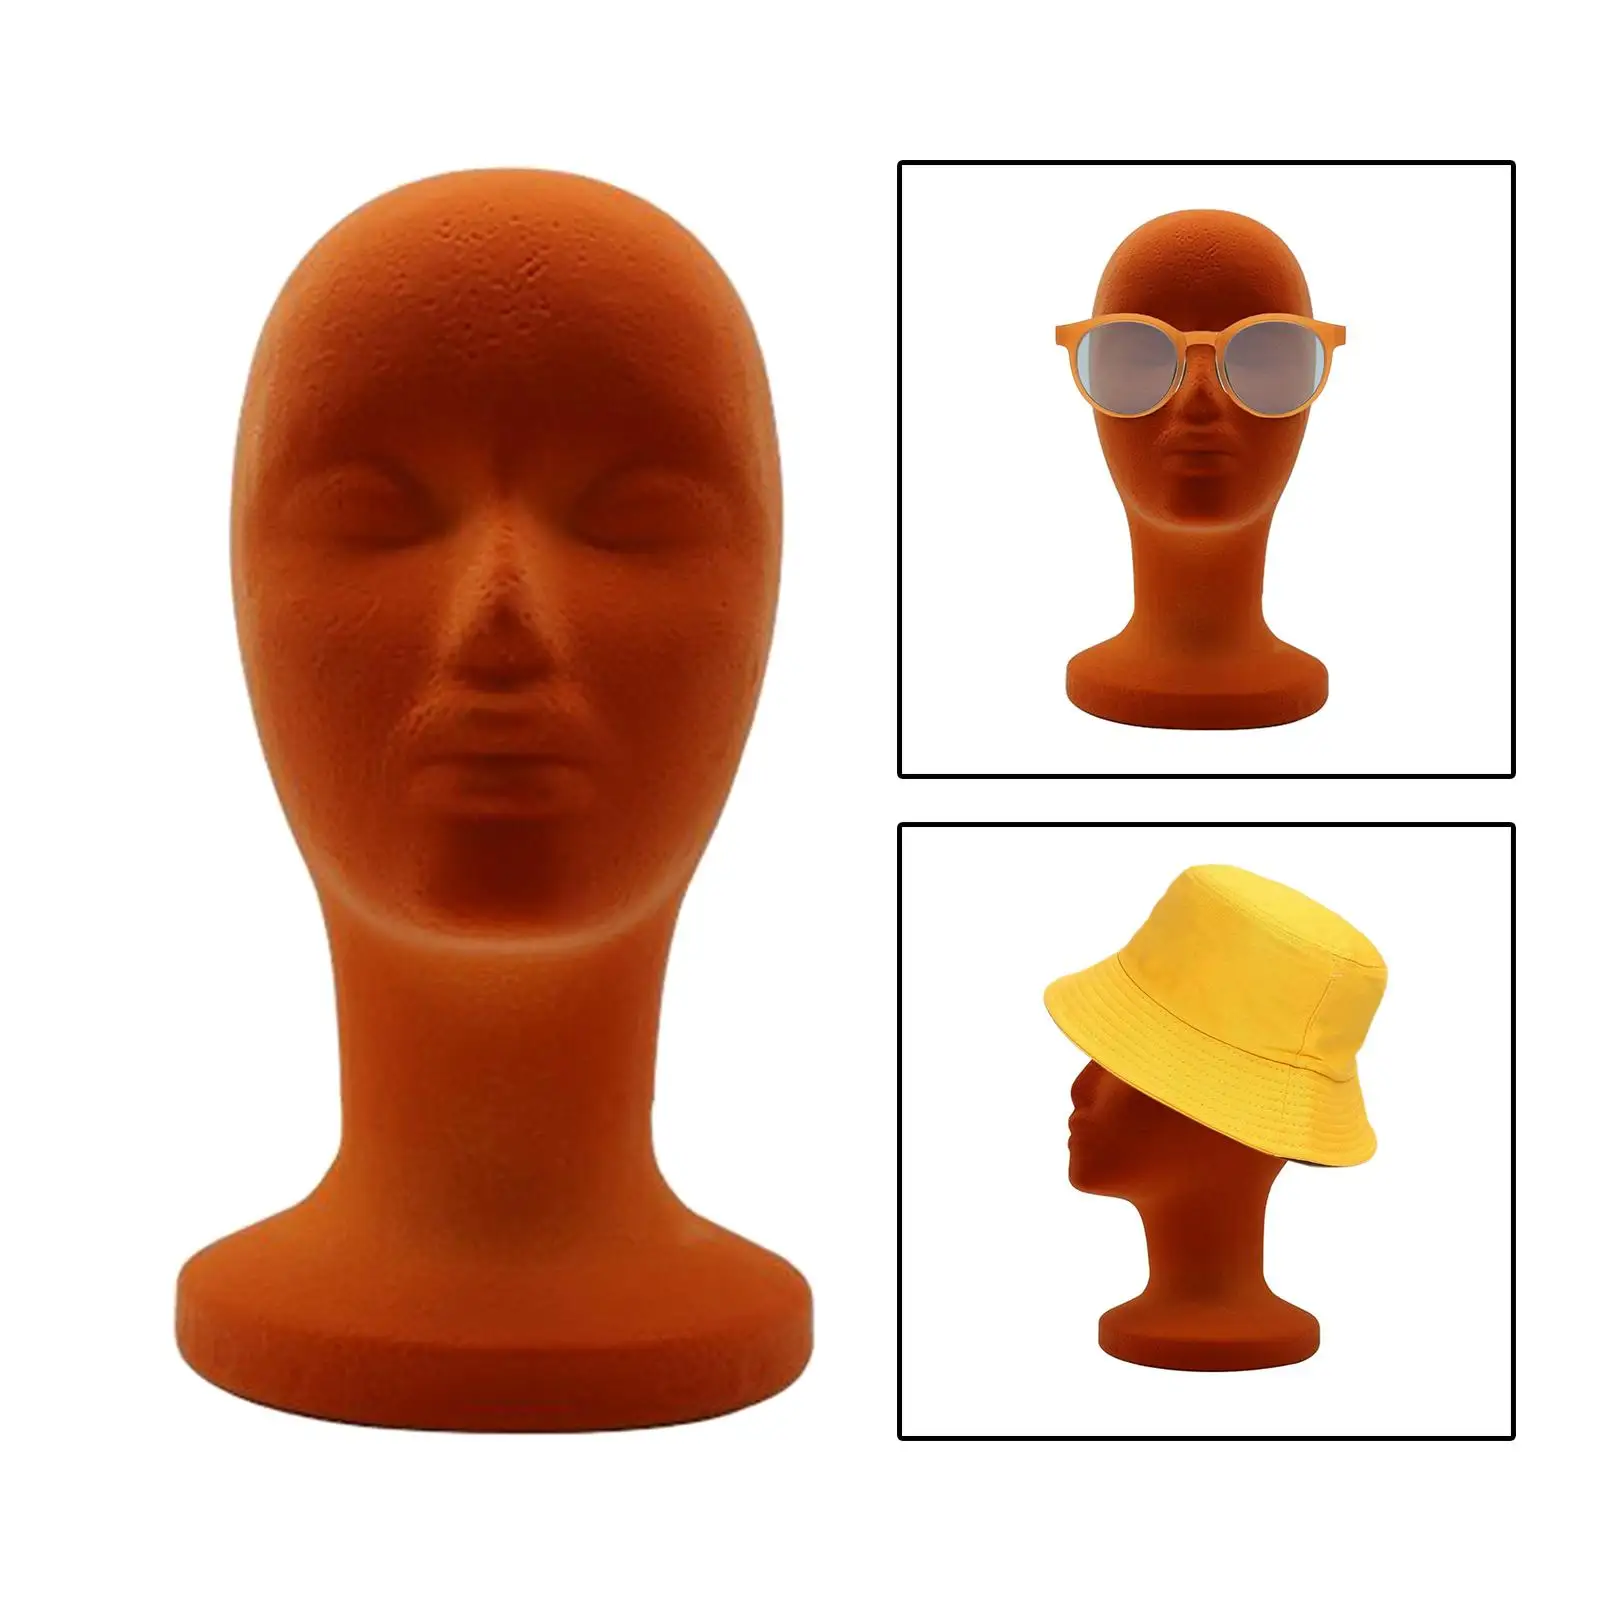  Display Stand Model and Display Hair for Headphone Hats Home